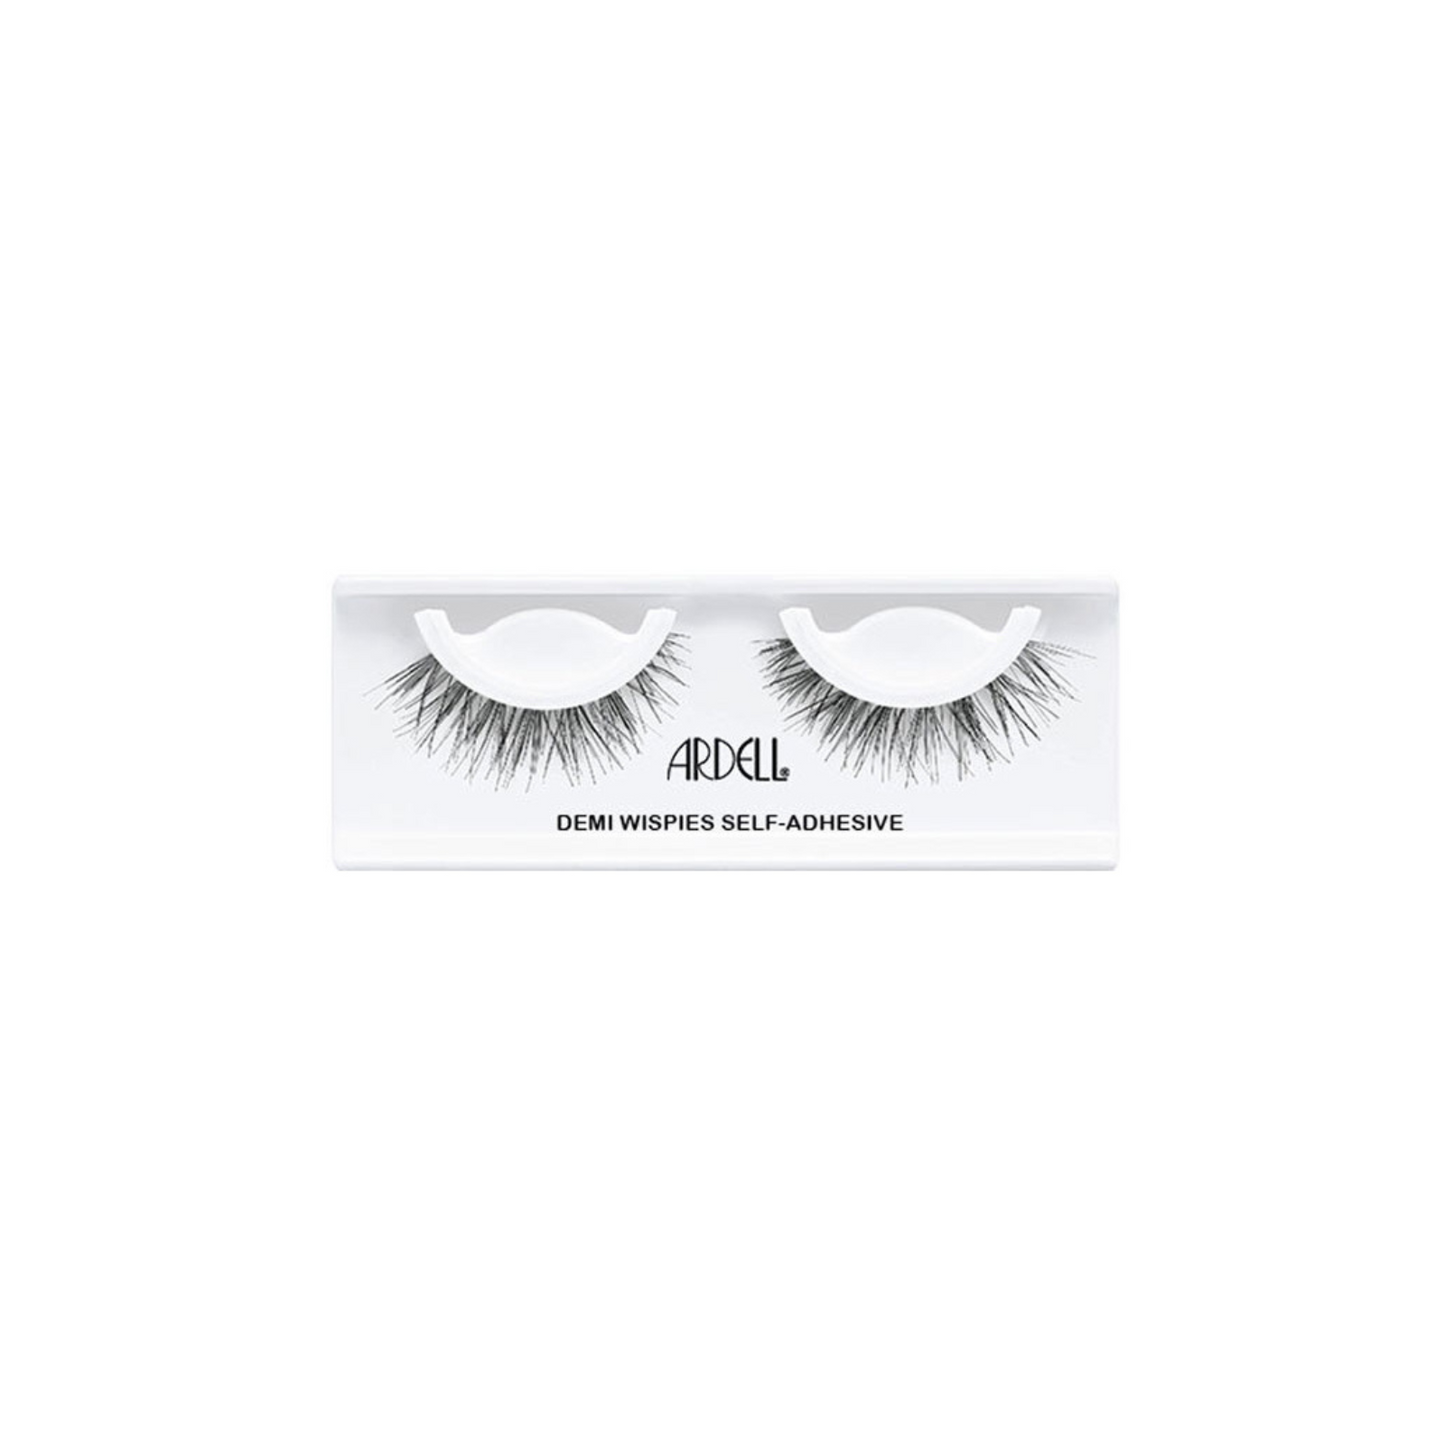 Ardell Professional Self-Adhesive Strip Lashes